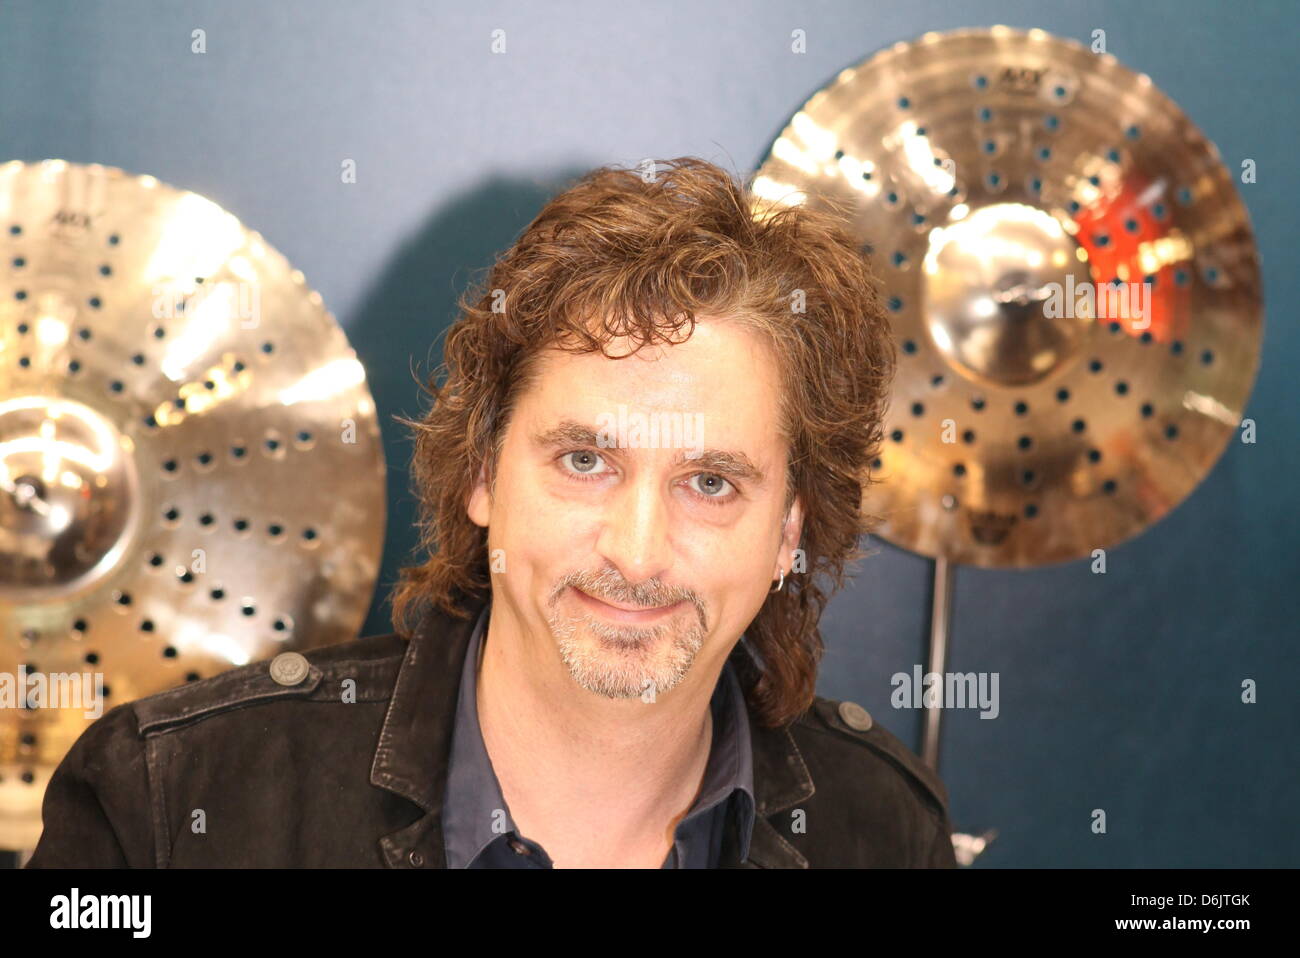 Todd Sucherman, drummer of the US band Styx, signs autographs during the Music Fair in Frankfurt/Main, Germany, 24 March 2012.  Photo: Susannah V. Vergau Stock Photo